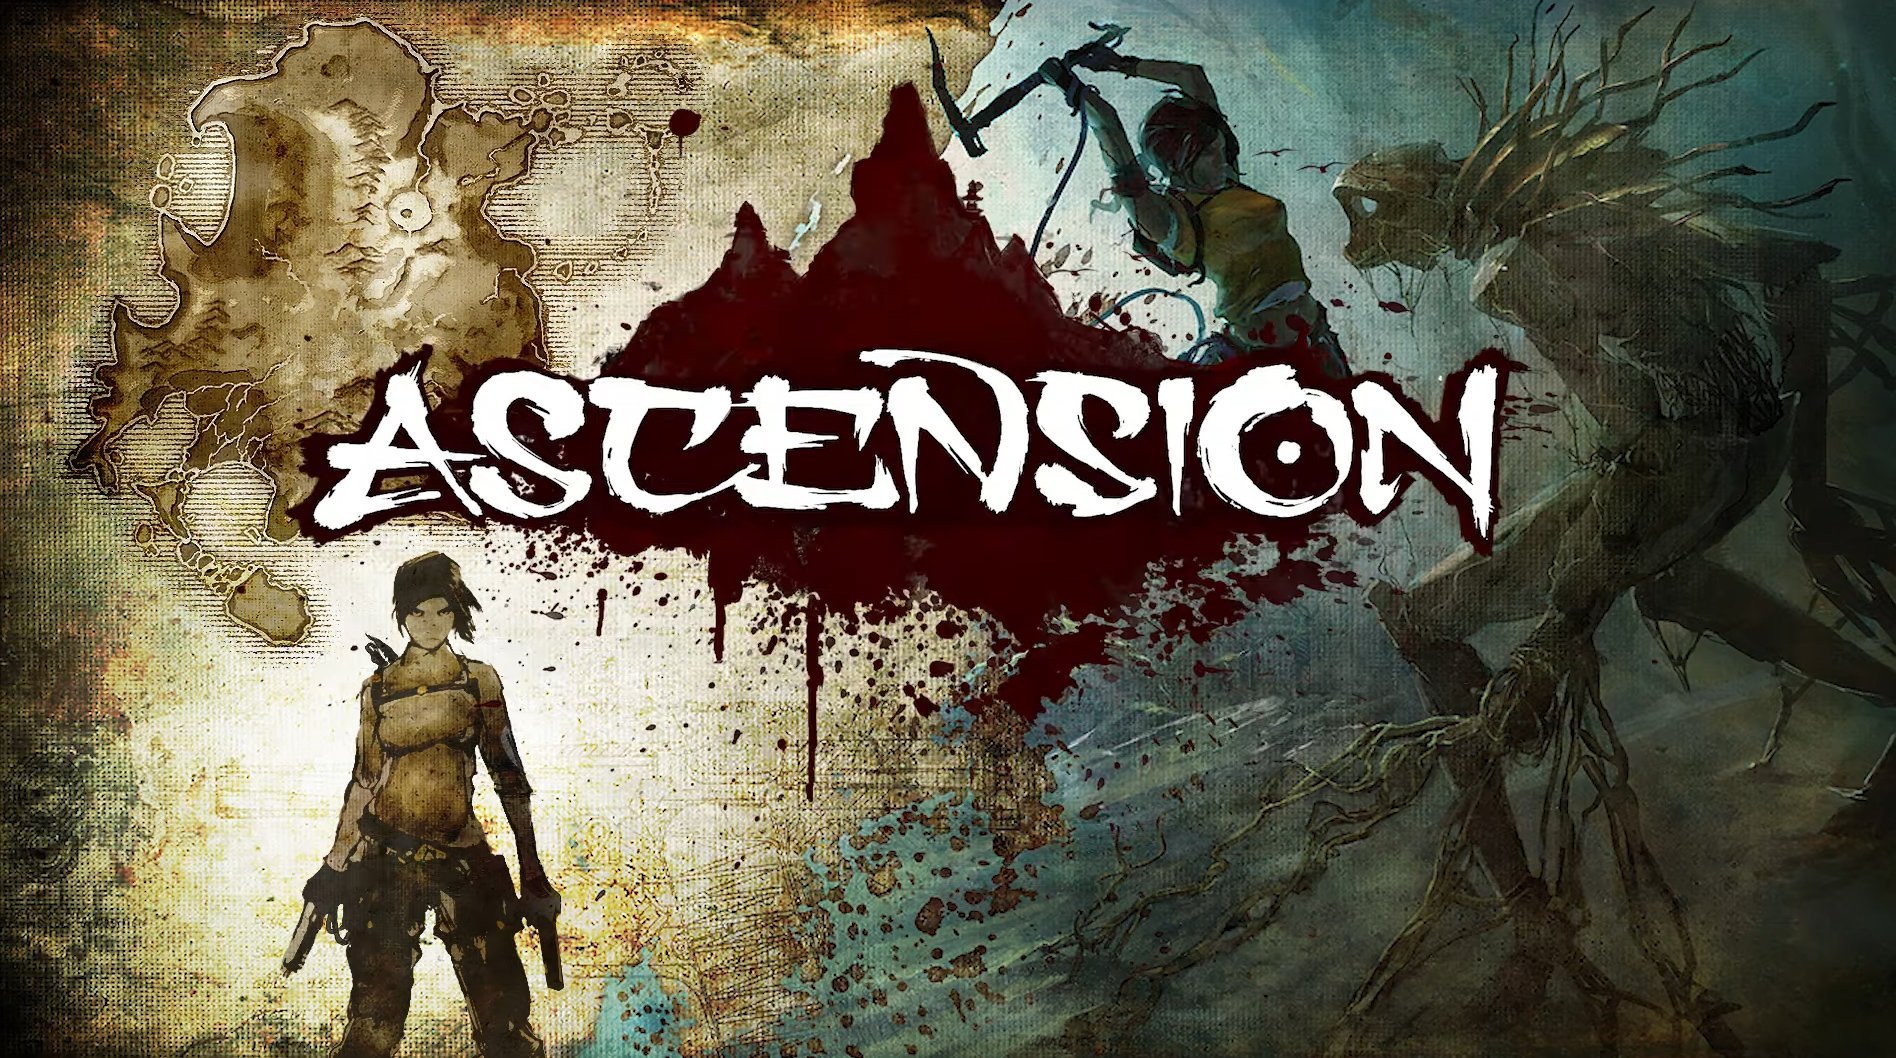 Cancelled Tomb Raider Horror Game “Ascension” Showcased